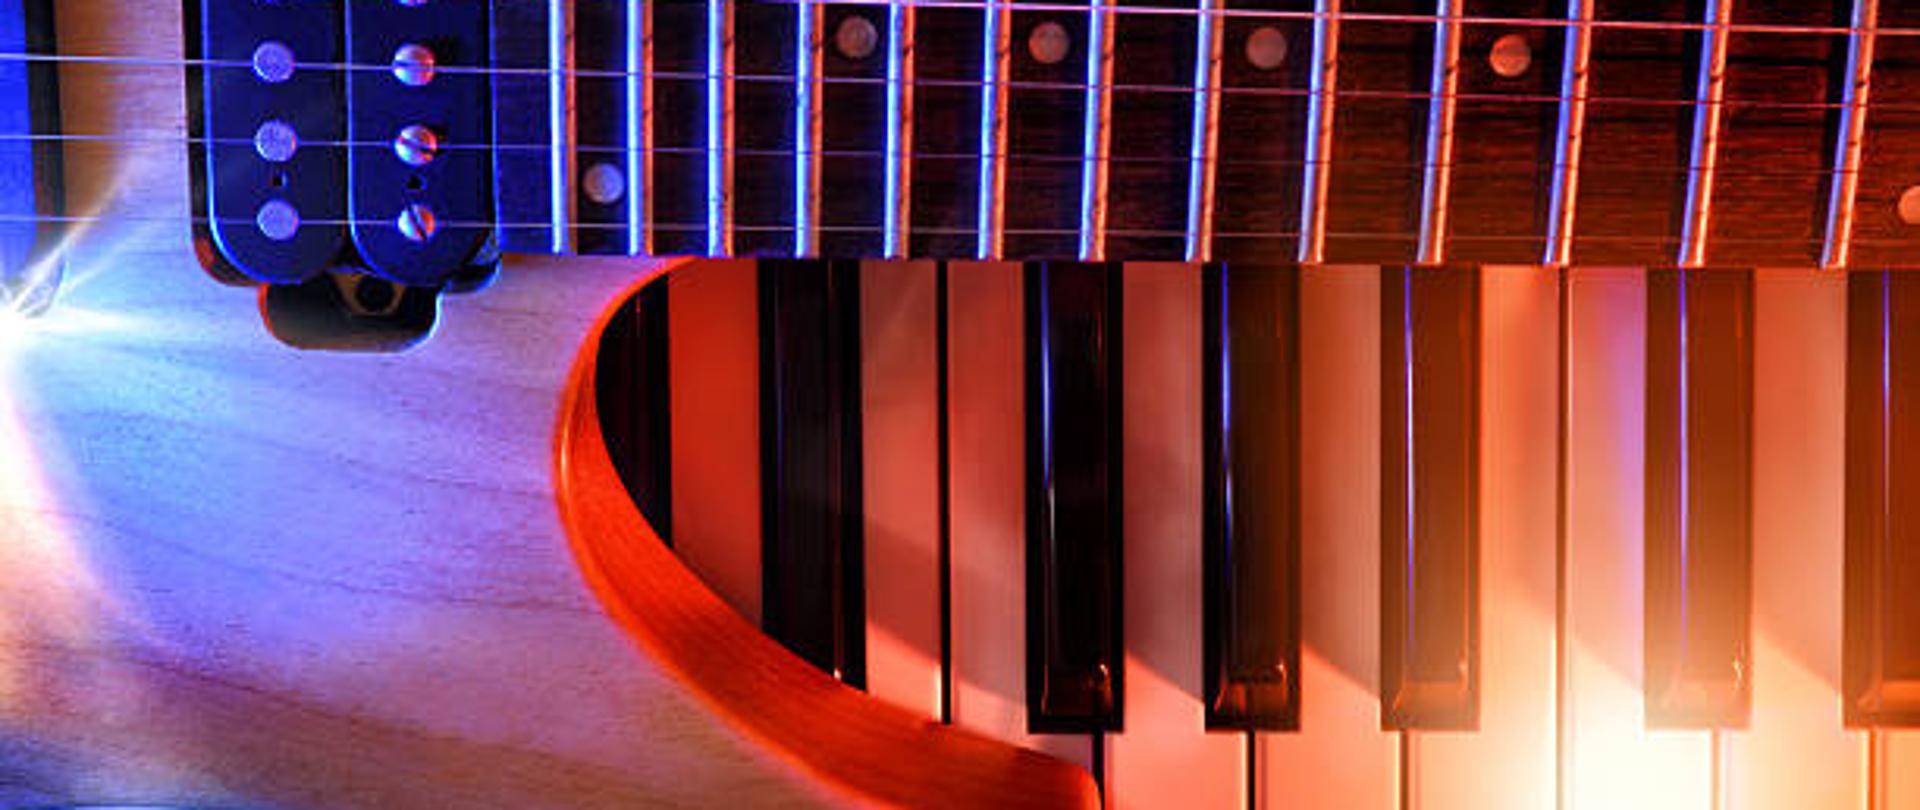 Electric guitar and synthesizer on sheet music with red and blue lights. Horizontal composition. Top view